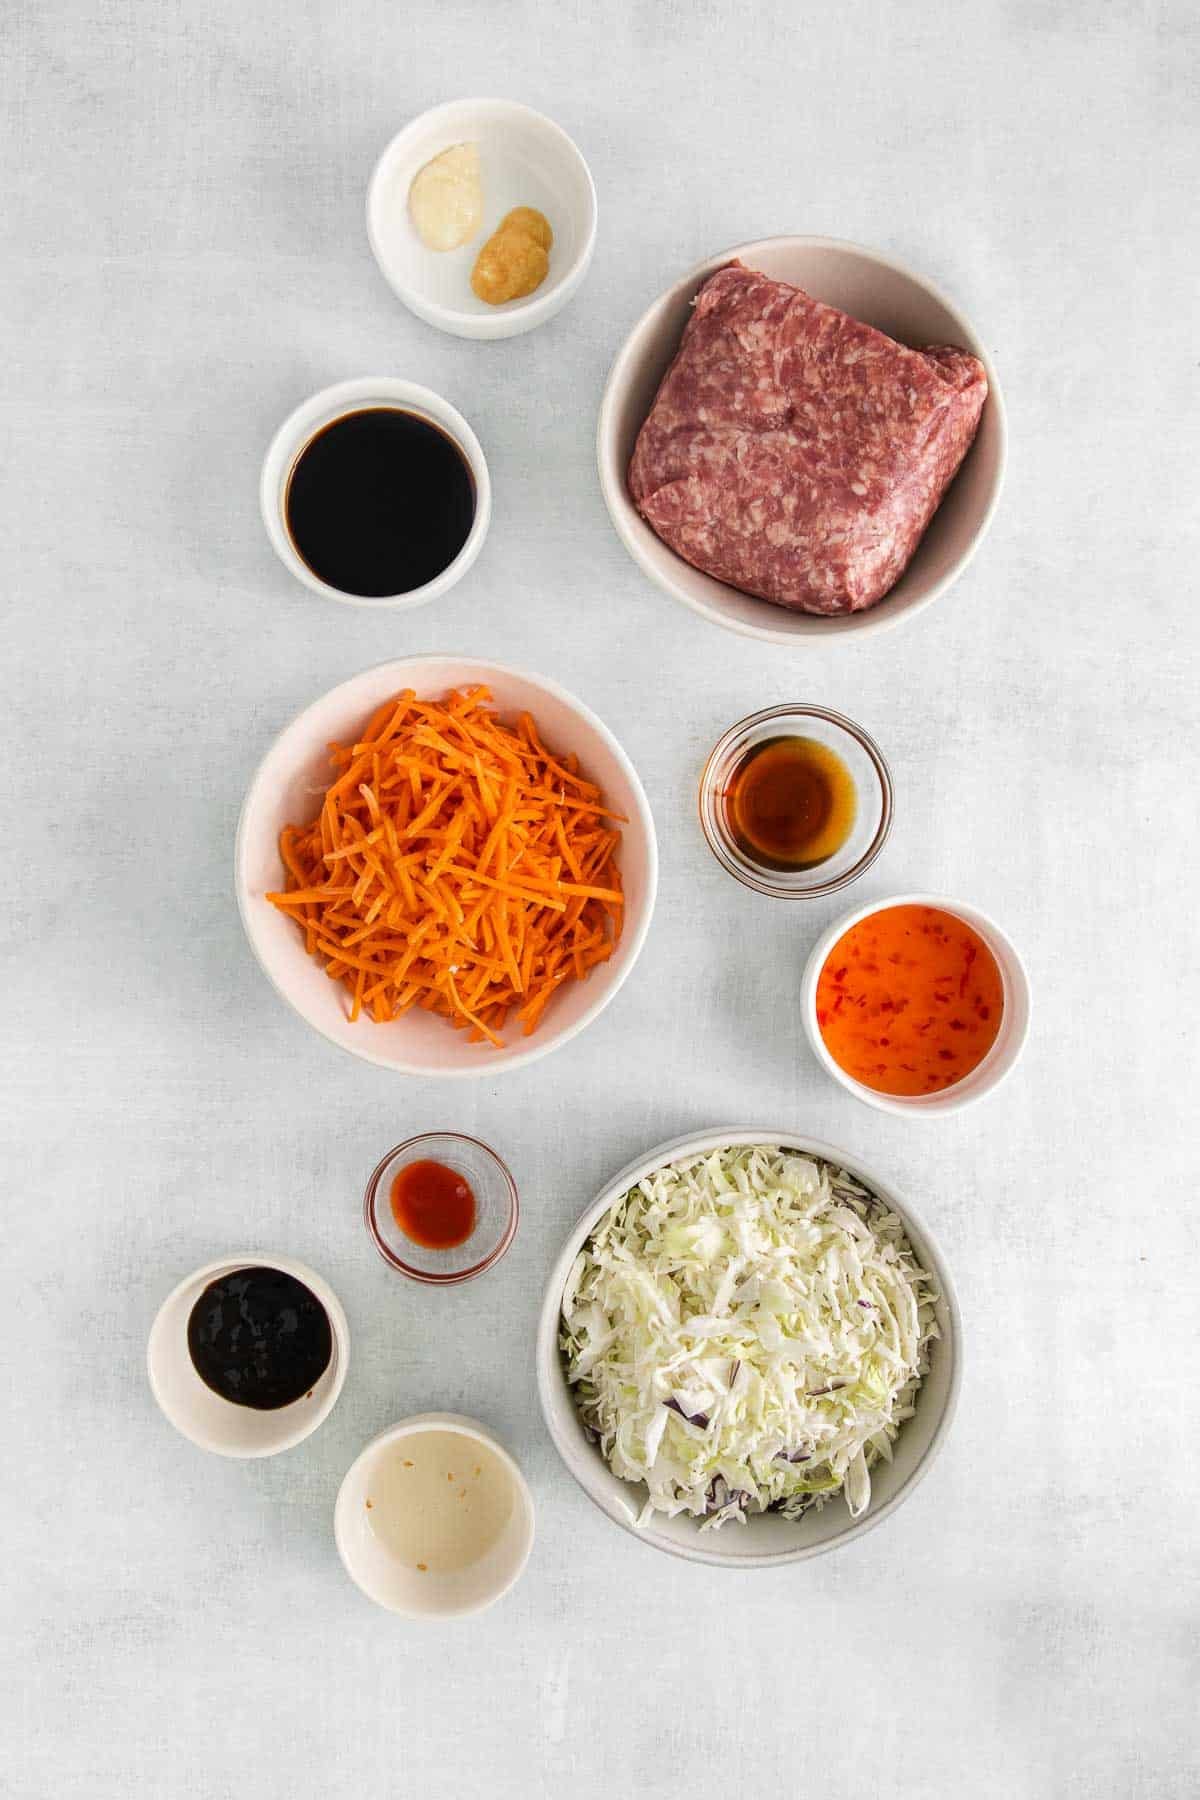 several white bowls with ingredients for egg roll in a bowl - ground pork, shredded cabbage, shredded carrots, soy sauce, sweet chili sauce, hoisin sauce, sesame oil, garlic and ginger.